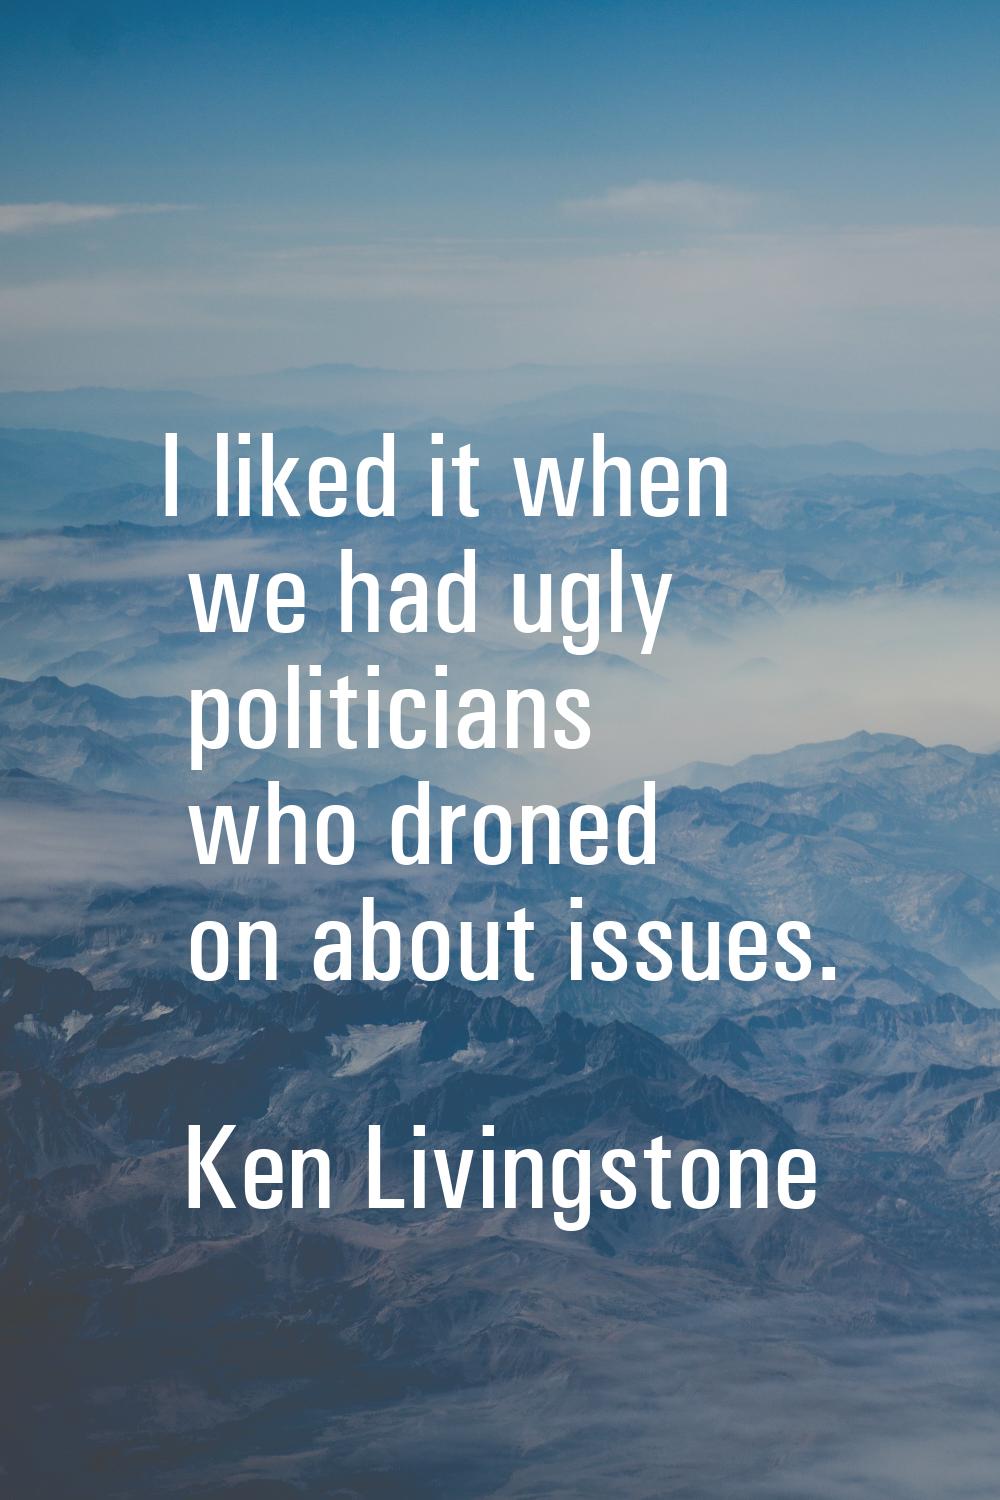 I liked it when we had ugly politicians who droned on about issues.